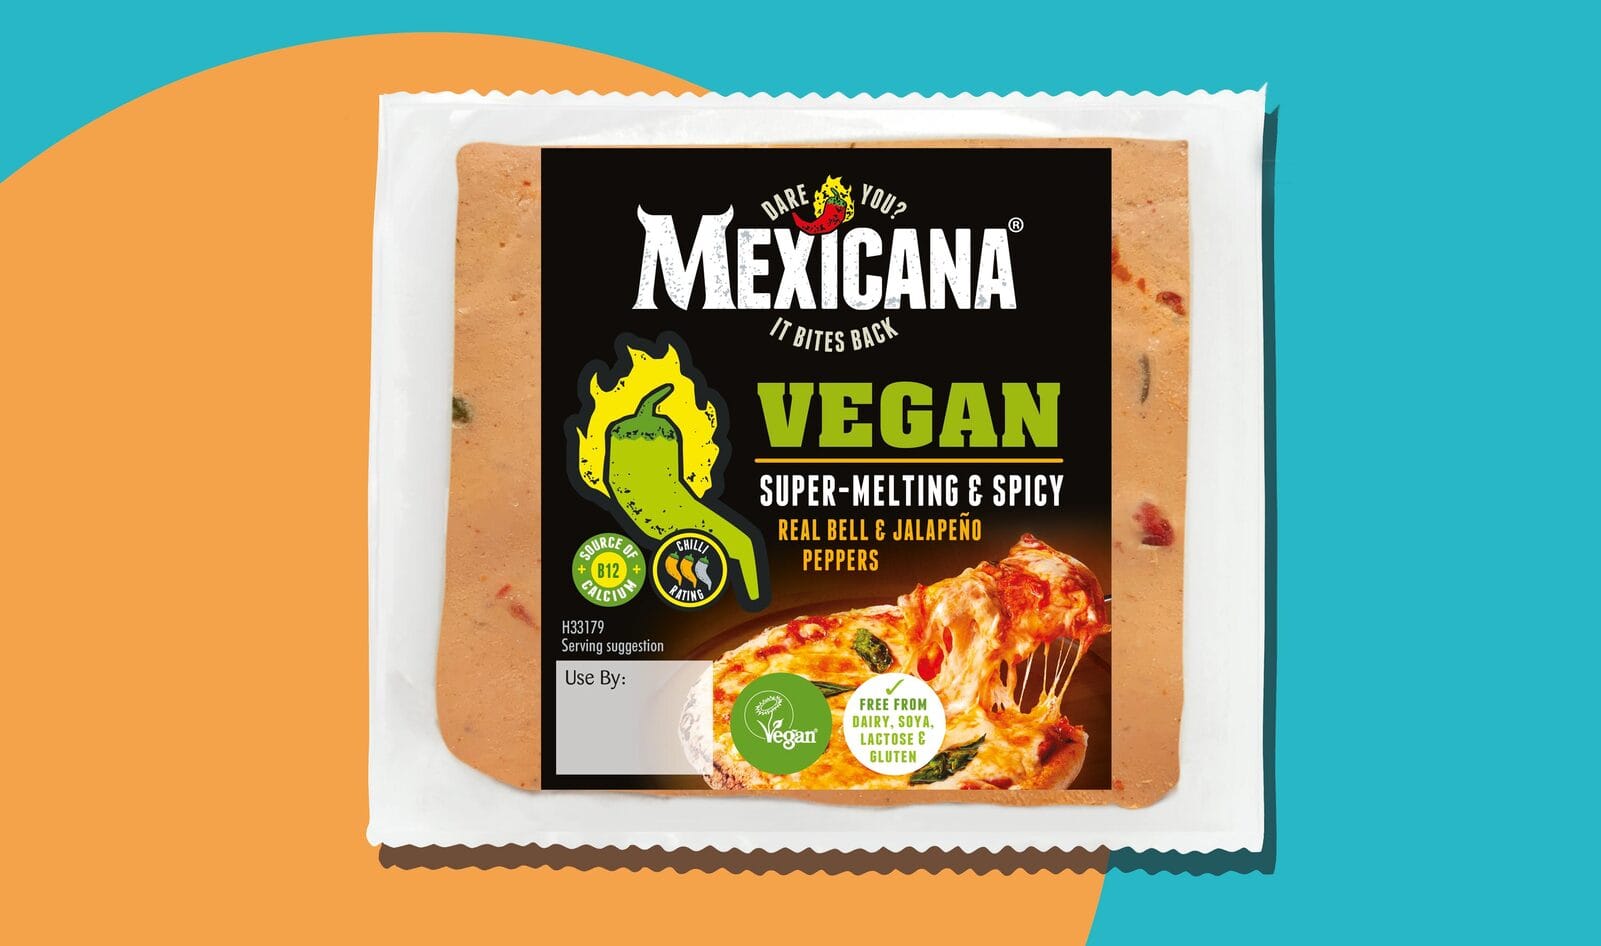 UK Dairy Brand to Launch Spicy Vegan “Mexicana” Cheese